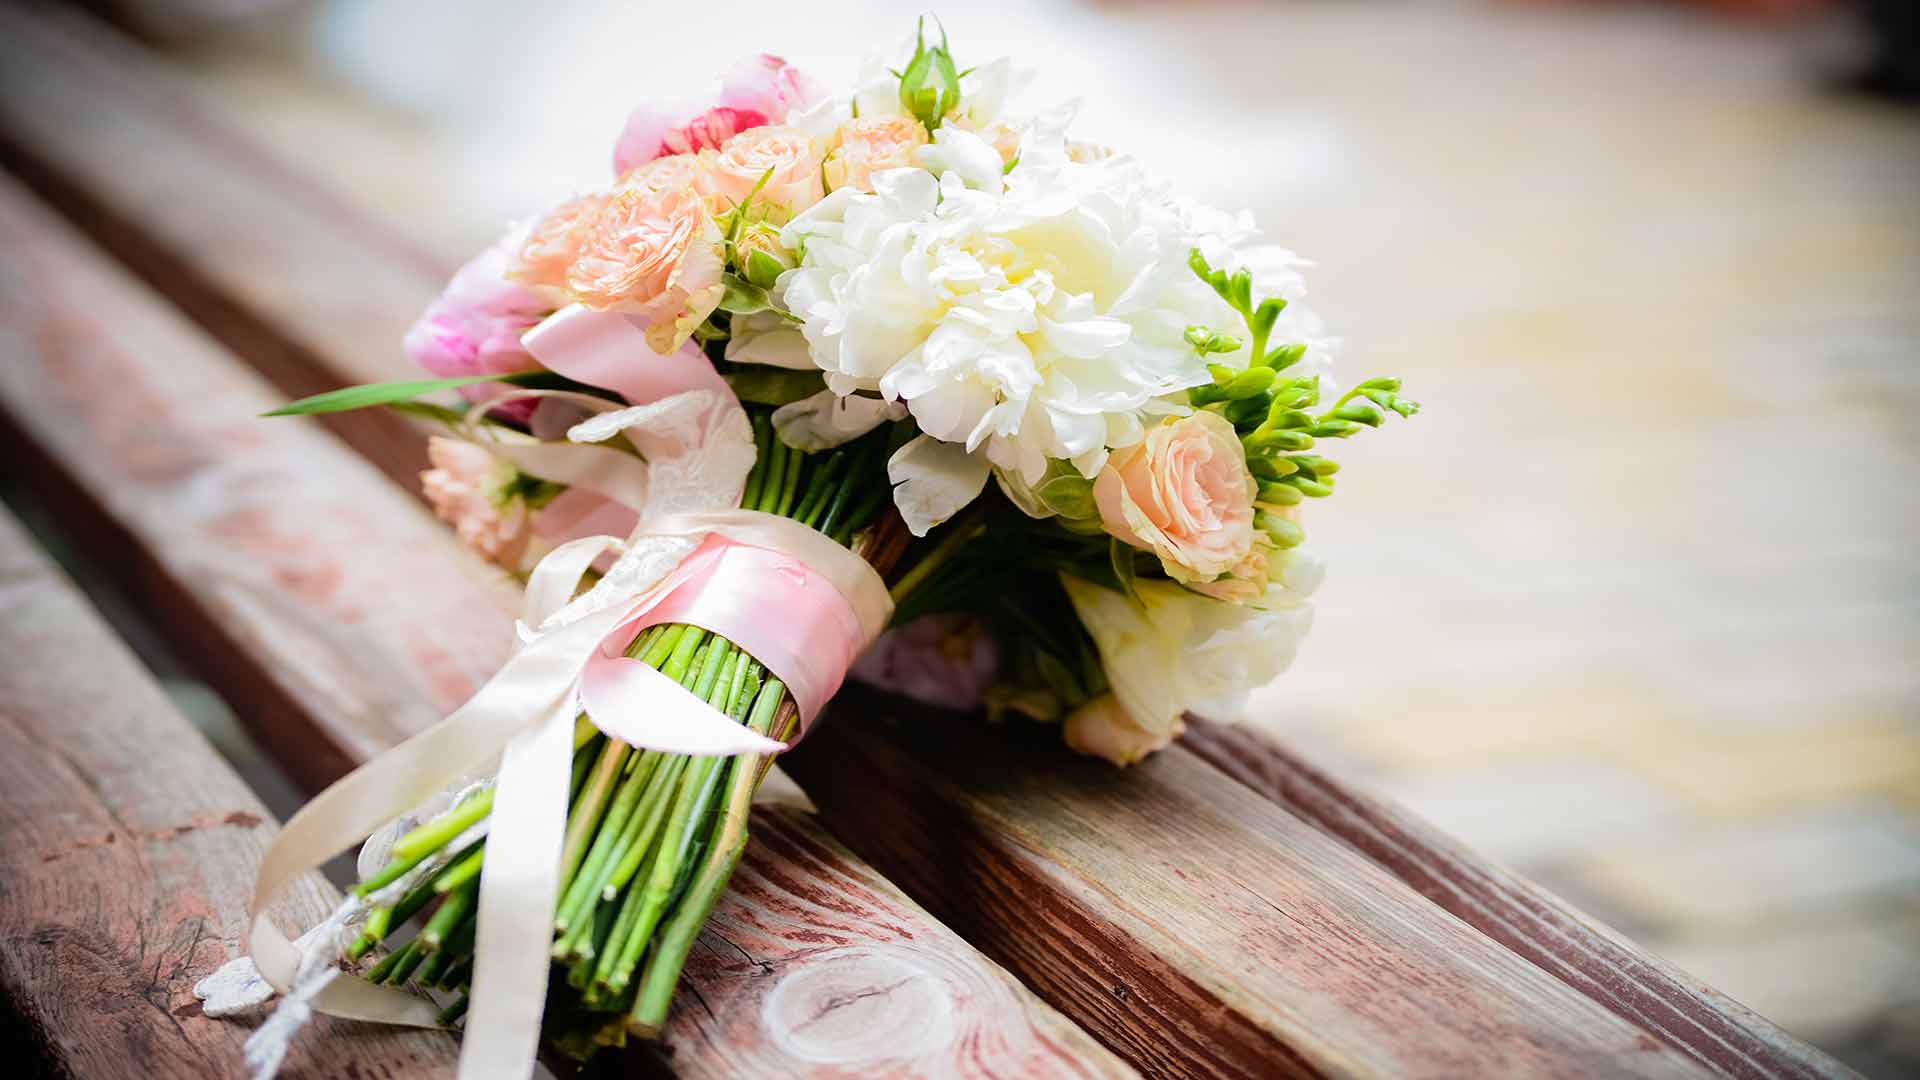 A bouquet of flowers sitting on top of a wooden bench
